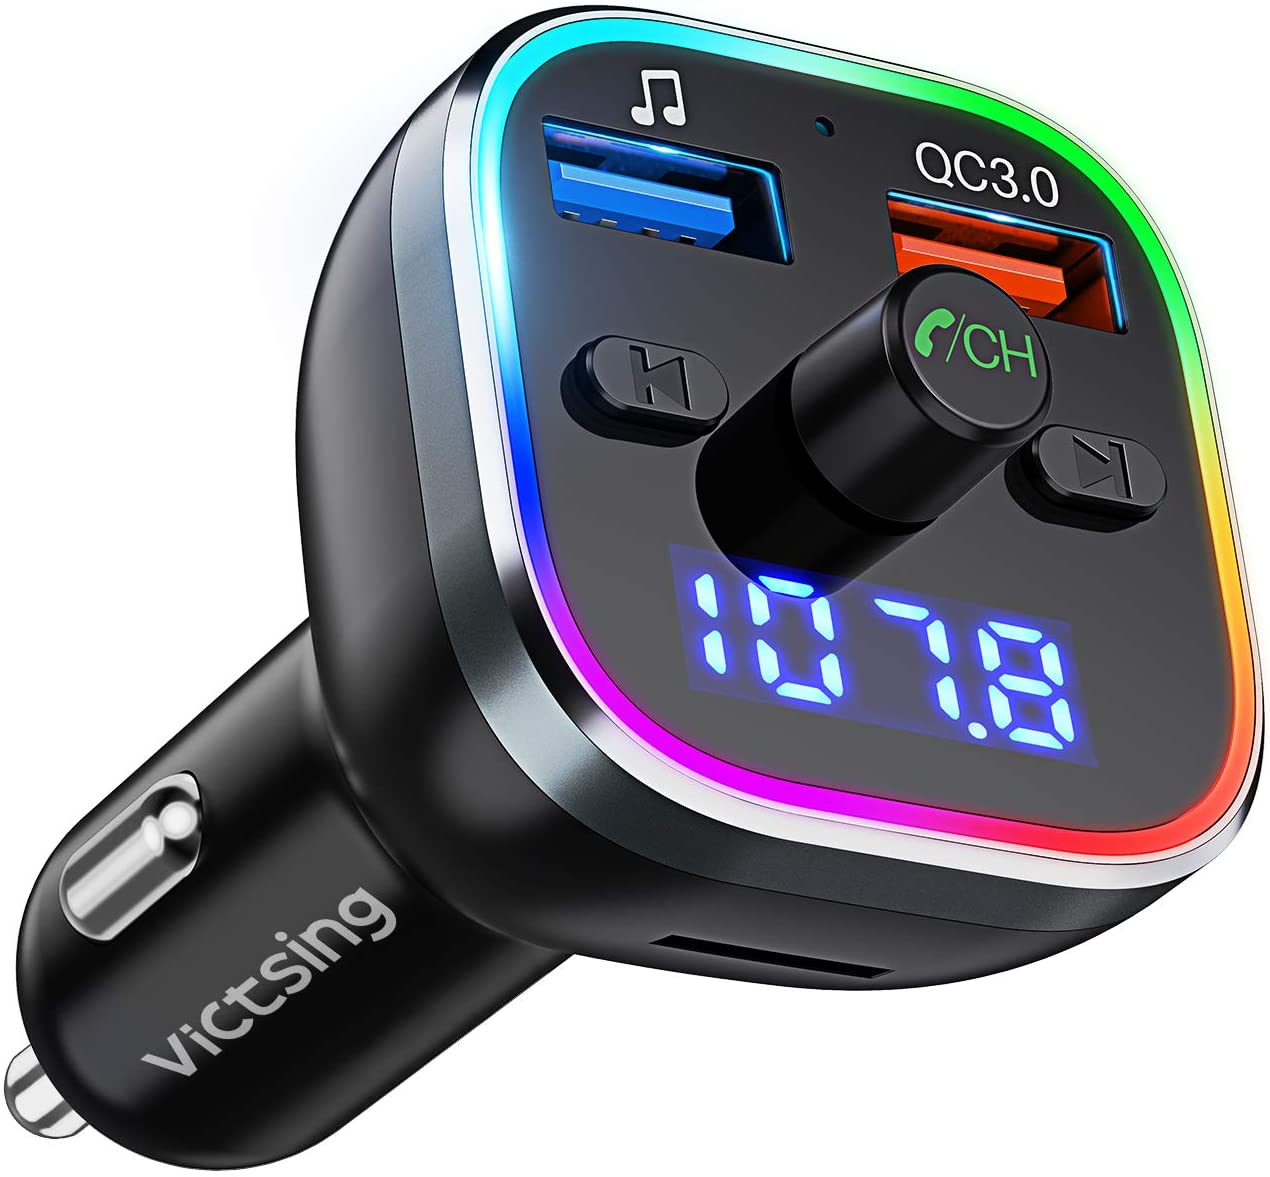 VicTsing FM Transmitter for Car, Bluetooth 5.0 Car Radio Audio Adapter & 6 RGB Colorful Light, MP3 Player Support Hands-free Calling, USB Drive, TF Card,Black